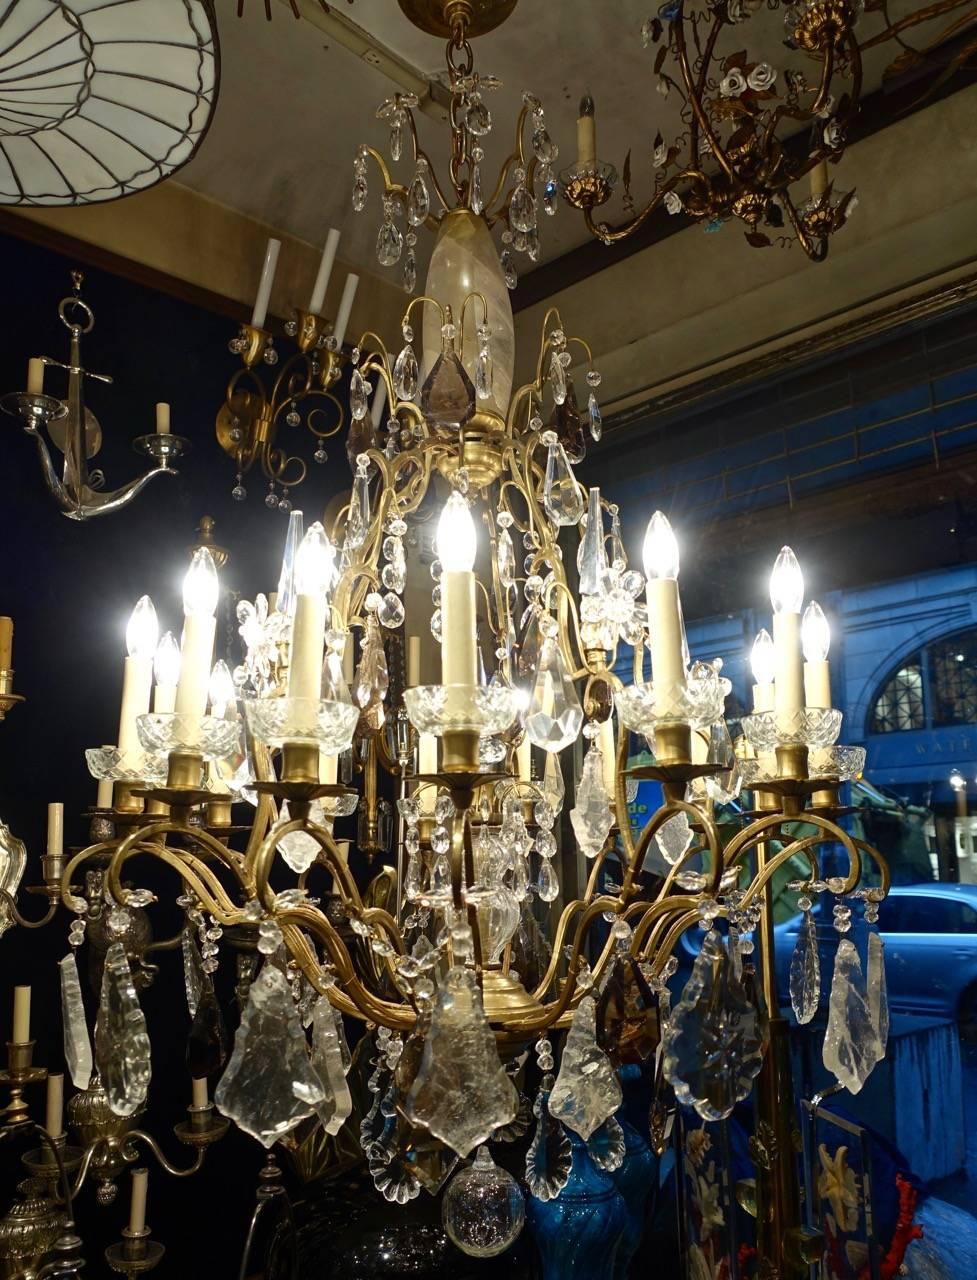 A circa 1900 French neoclassic style gilt bronze chandelier with 15 lights, with rock crystal and smoke color quartz pendants.

Measurements:
Height: 45